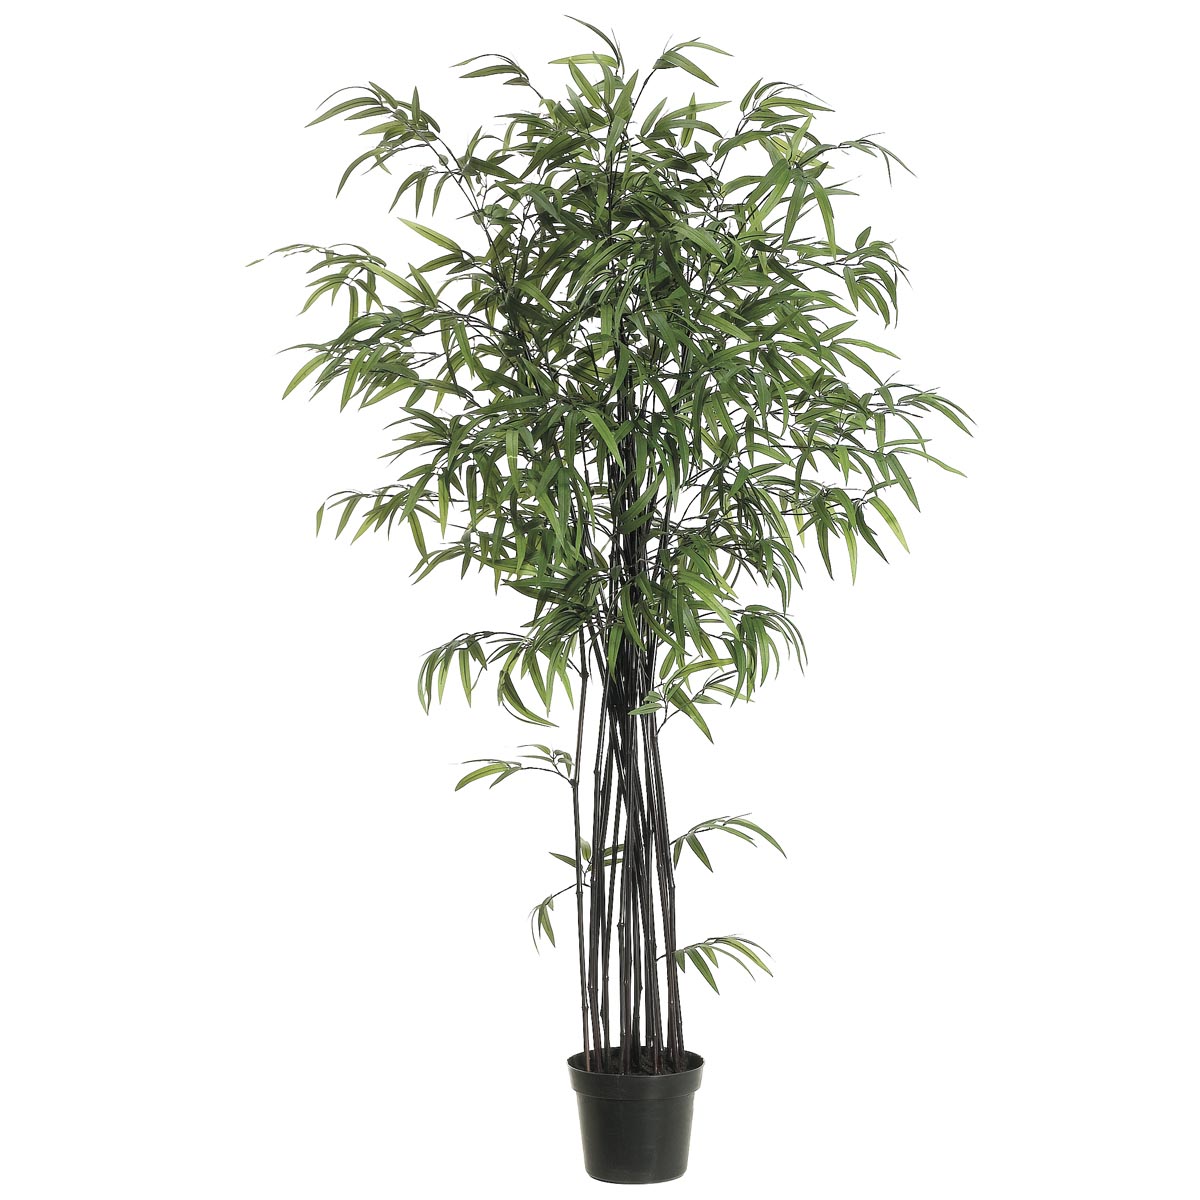 5 Foot Black Bamboo Tree: Potted